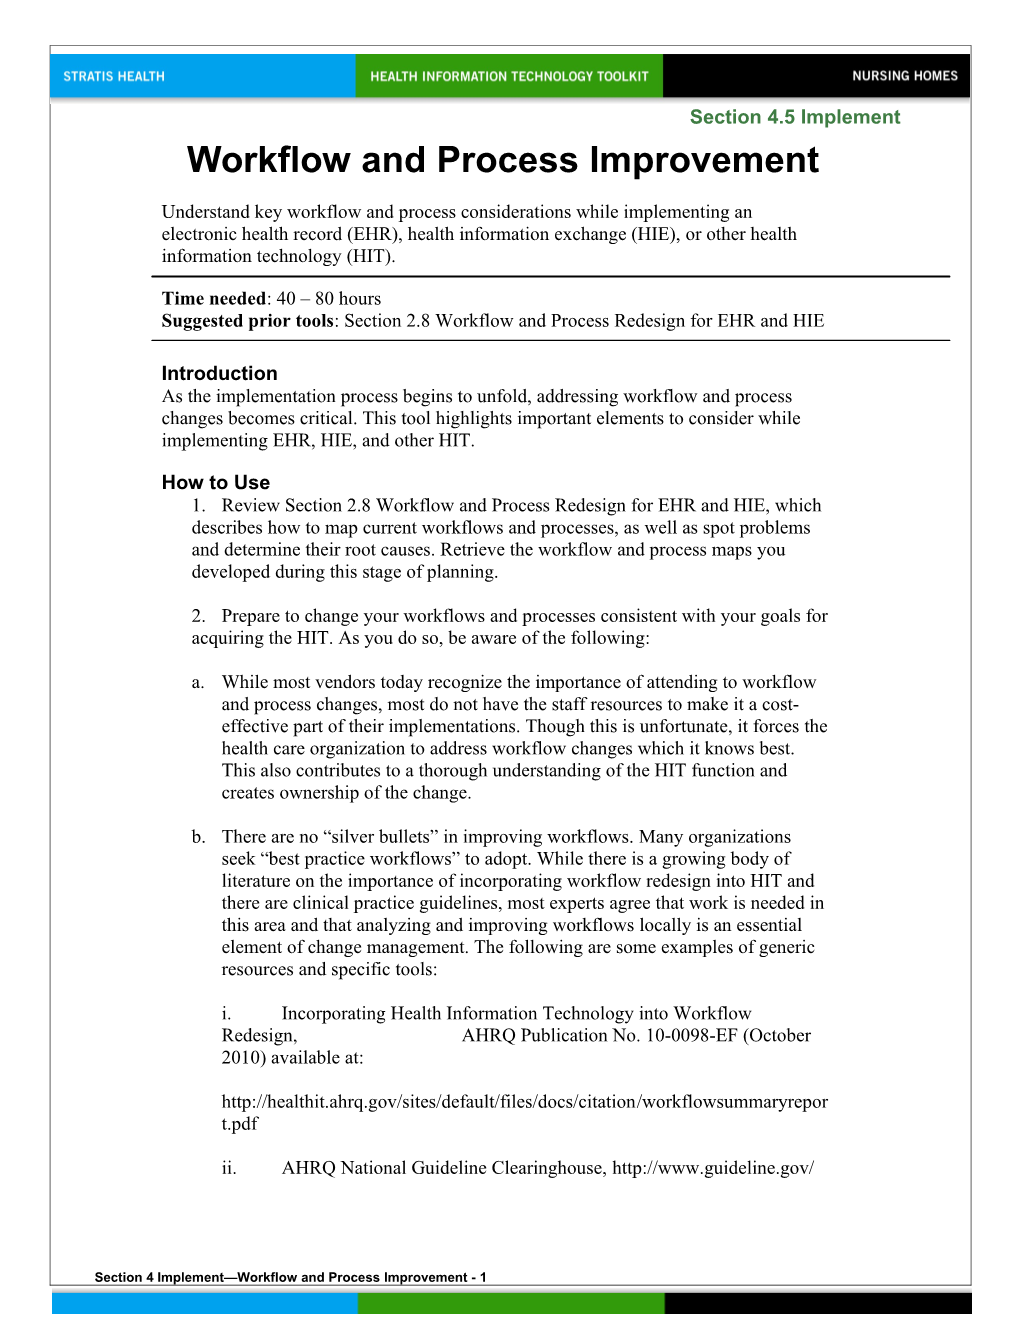 4 Workflow and Process Improvement